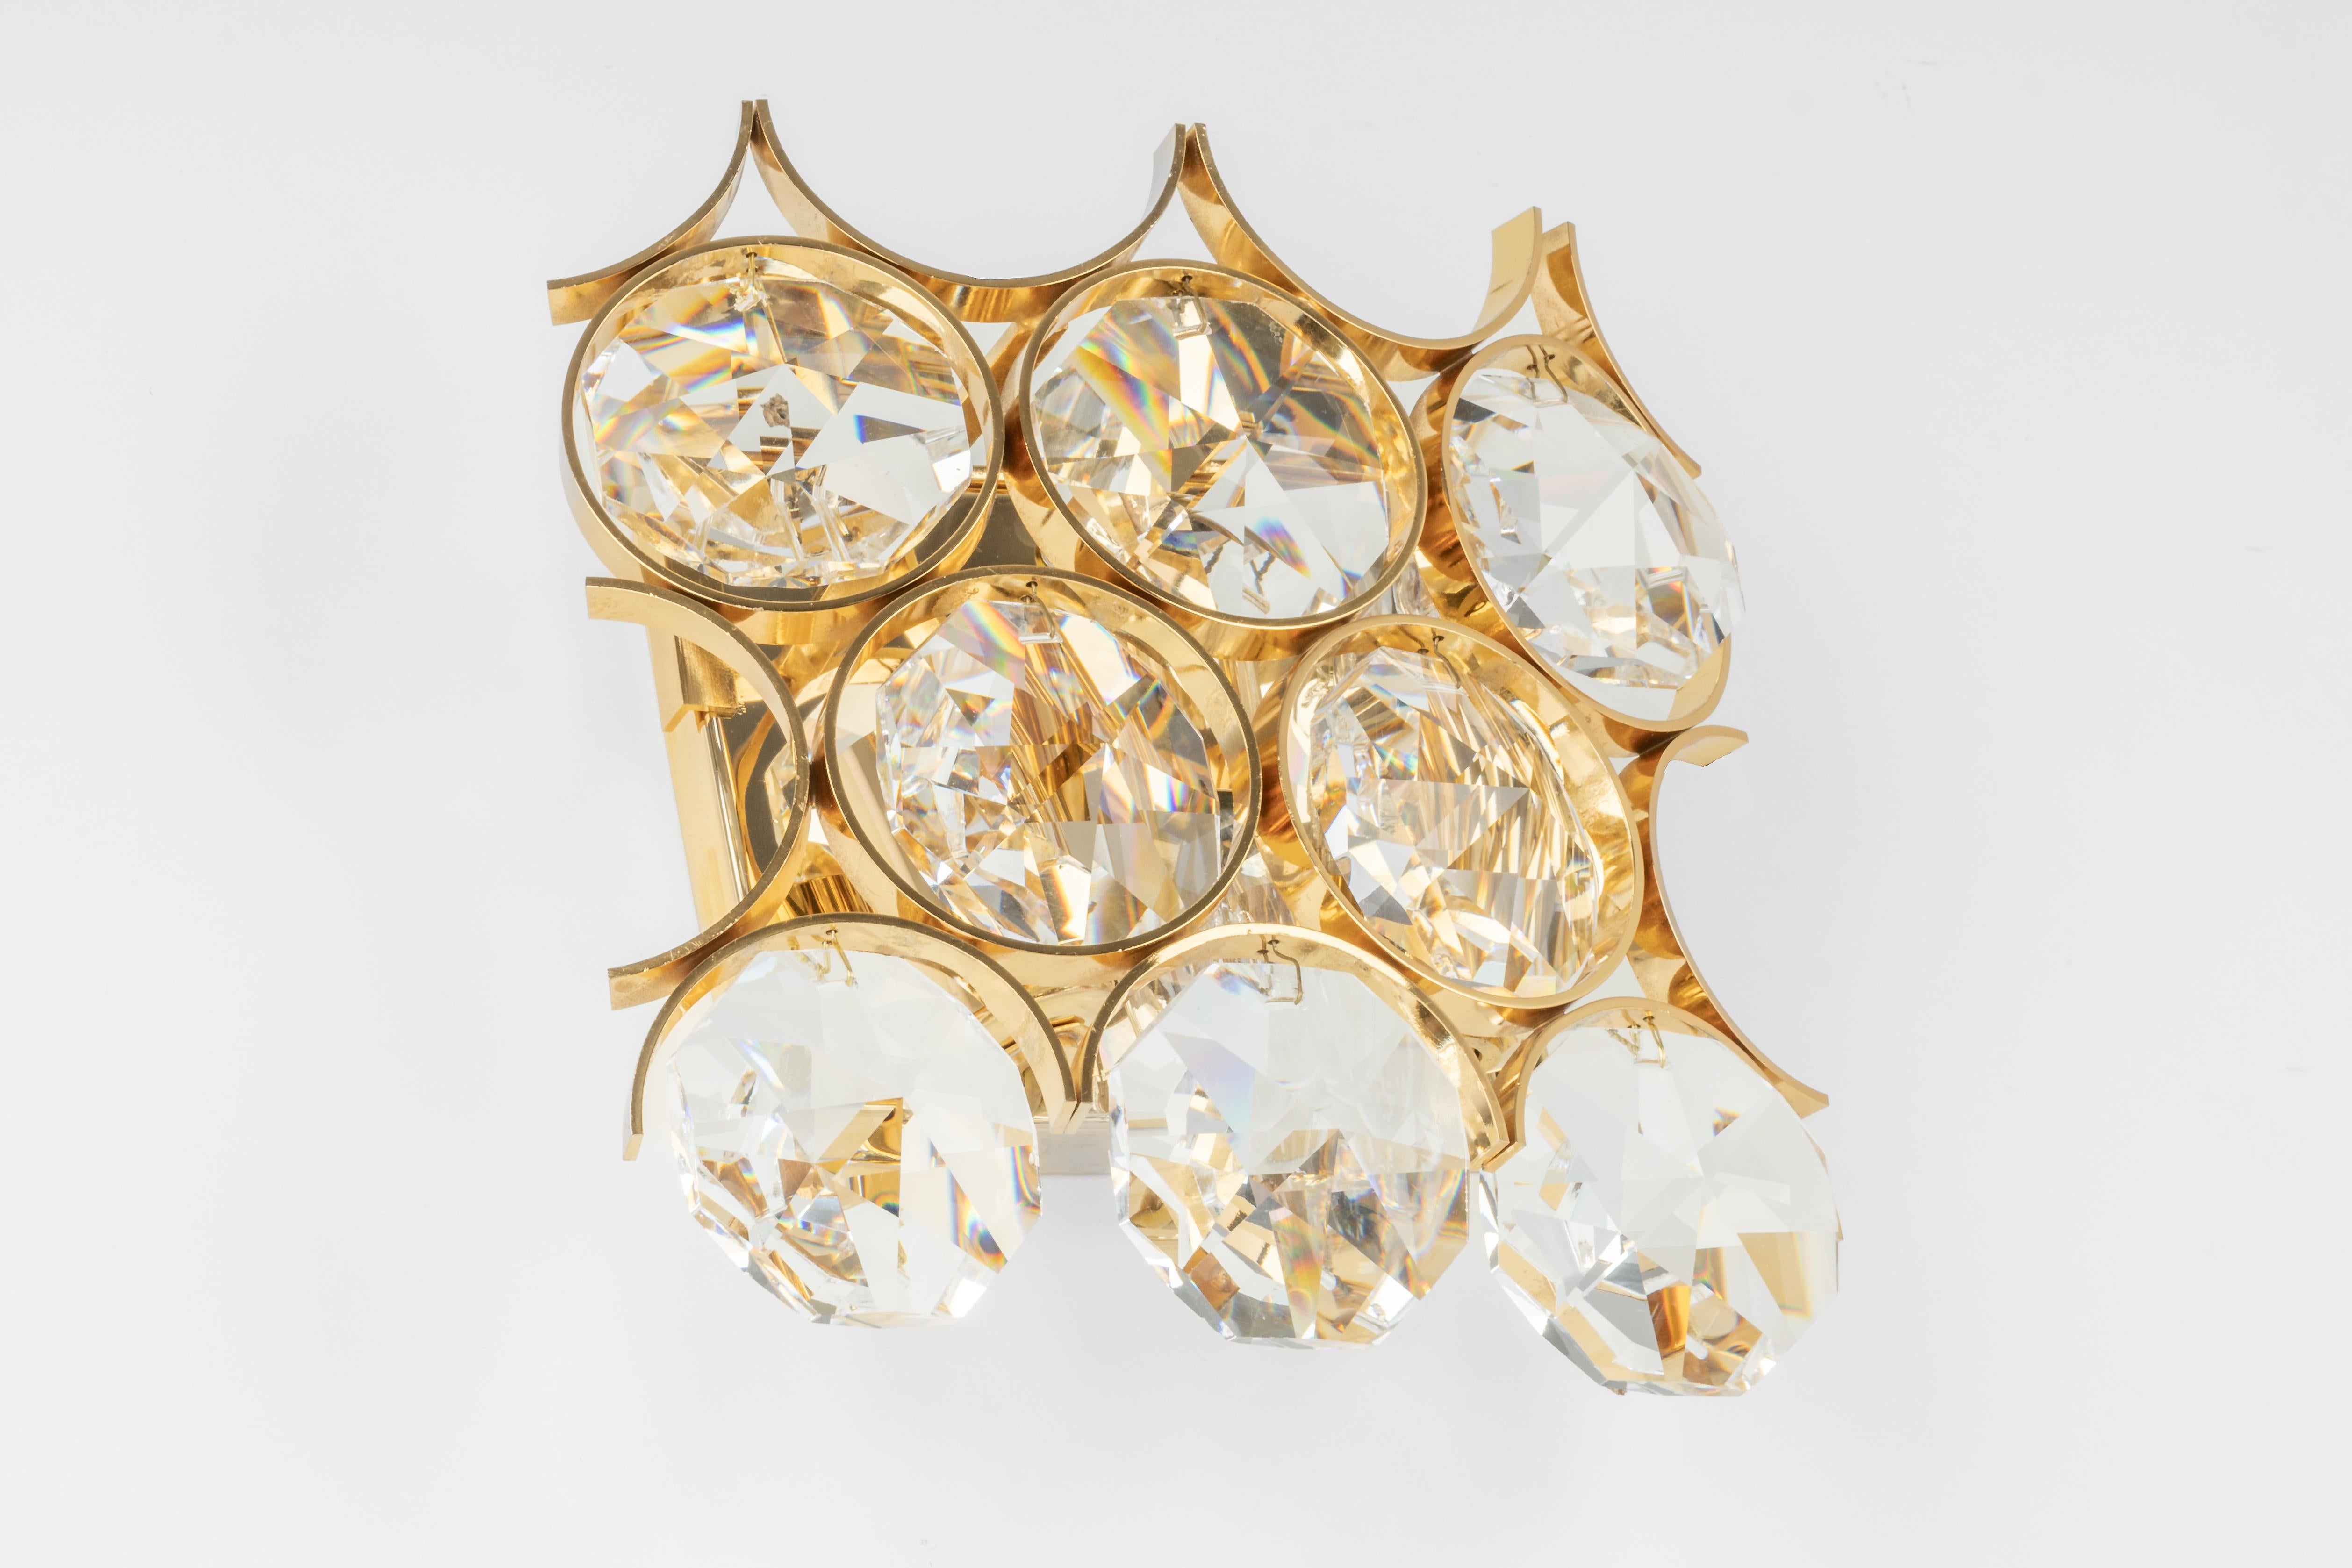 1 of 2 Pairs of Crystal Wall Lights, Sciolari Design, Palwa, Germany, 1960s In Good Condition For Sale In Aachen, NRW